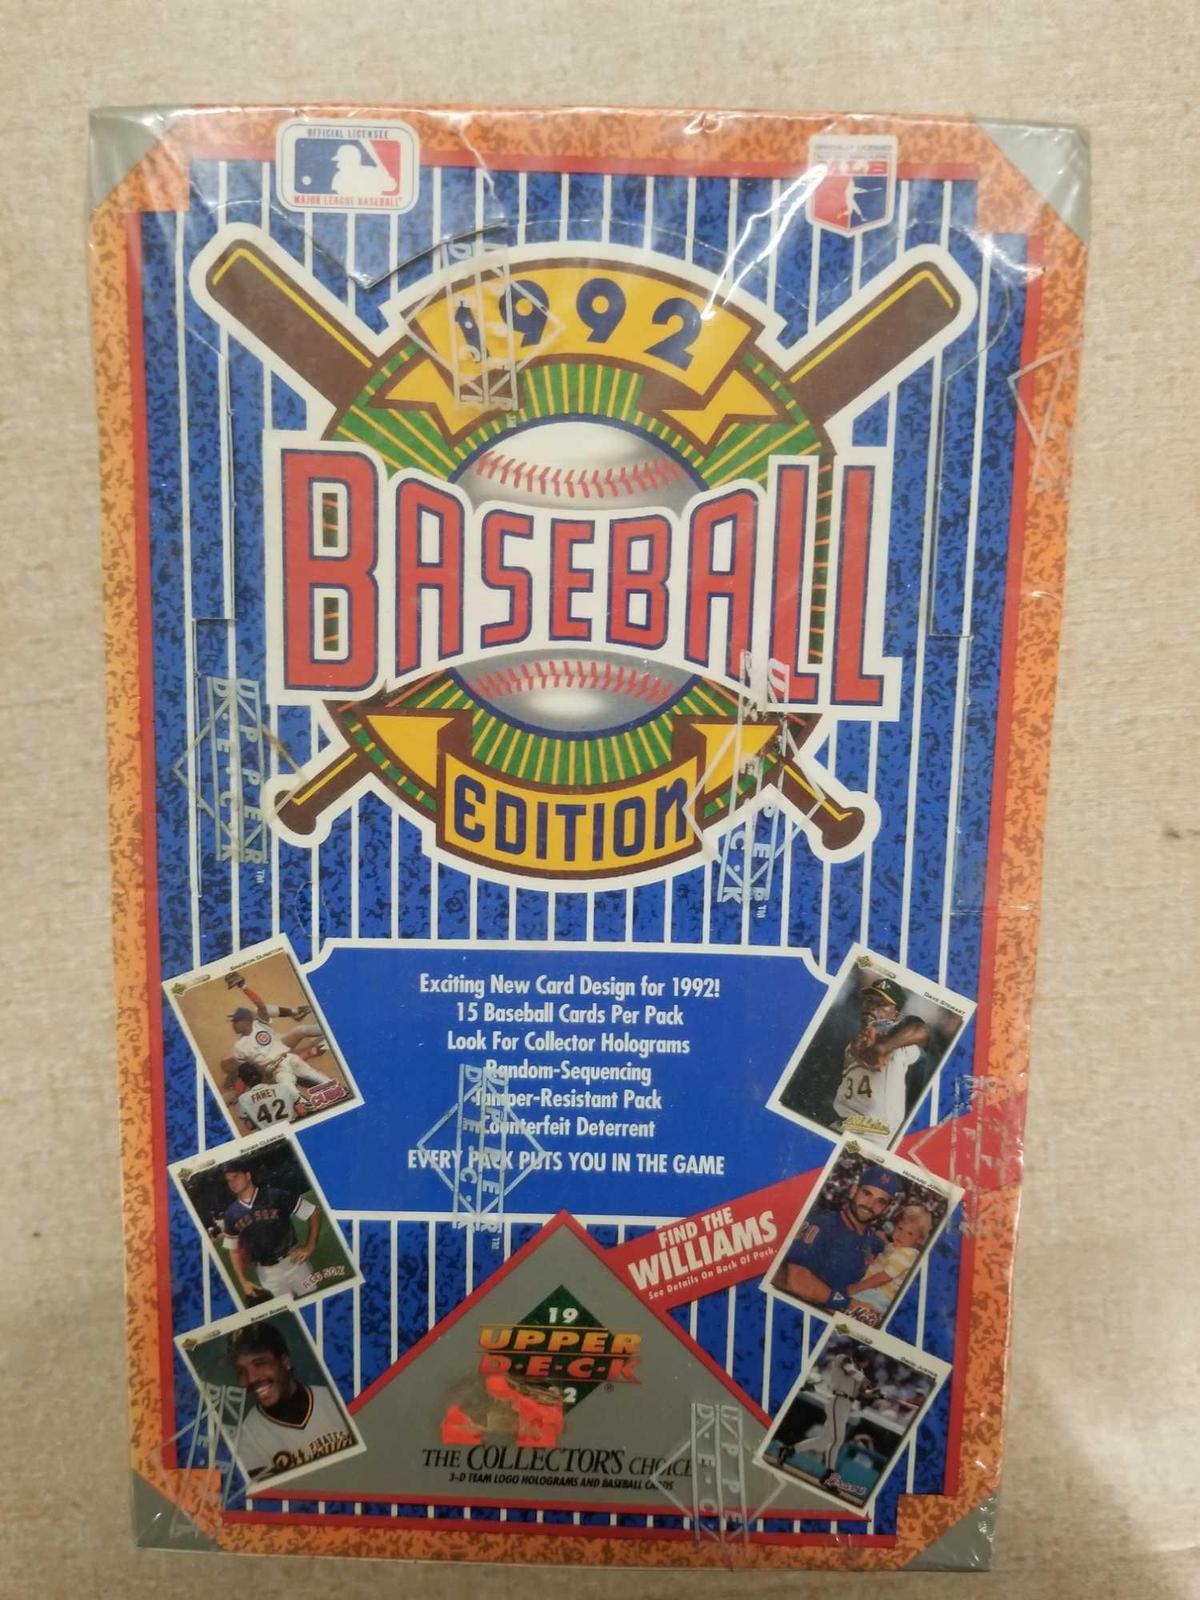 Sealed 1992 Upper Deck Baseball 36 Pack Box from Store Closeout